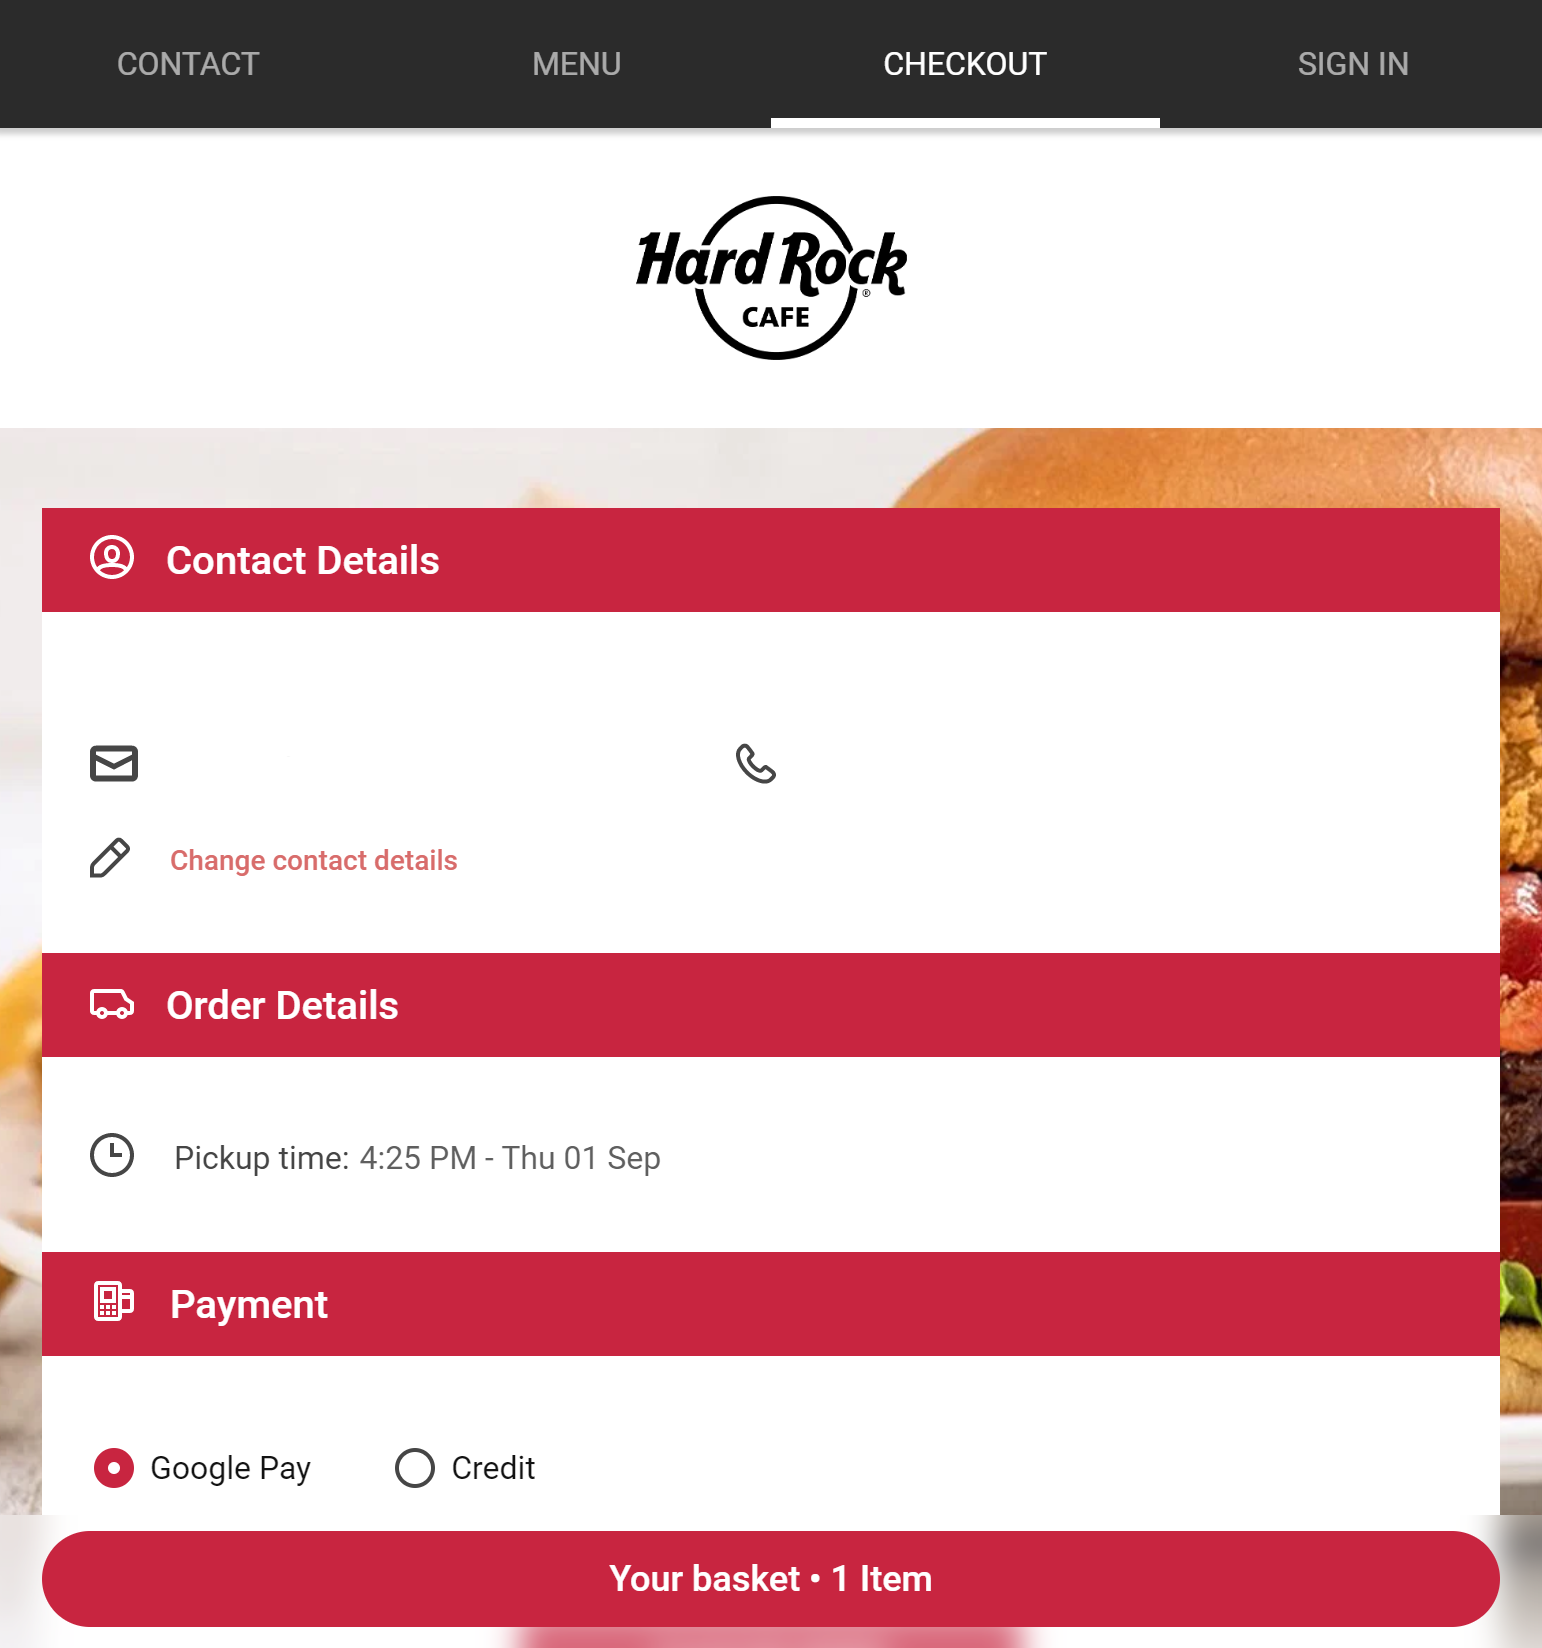 Hard Rock Cafe accepts Google Pay online.